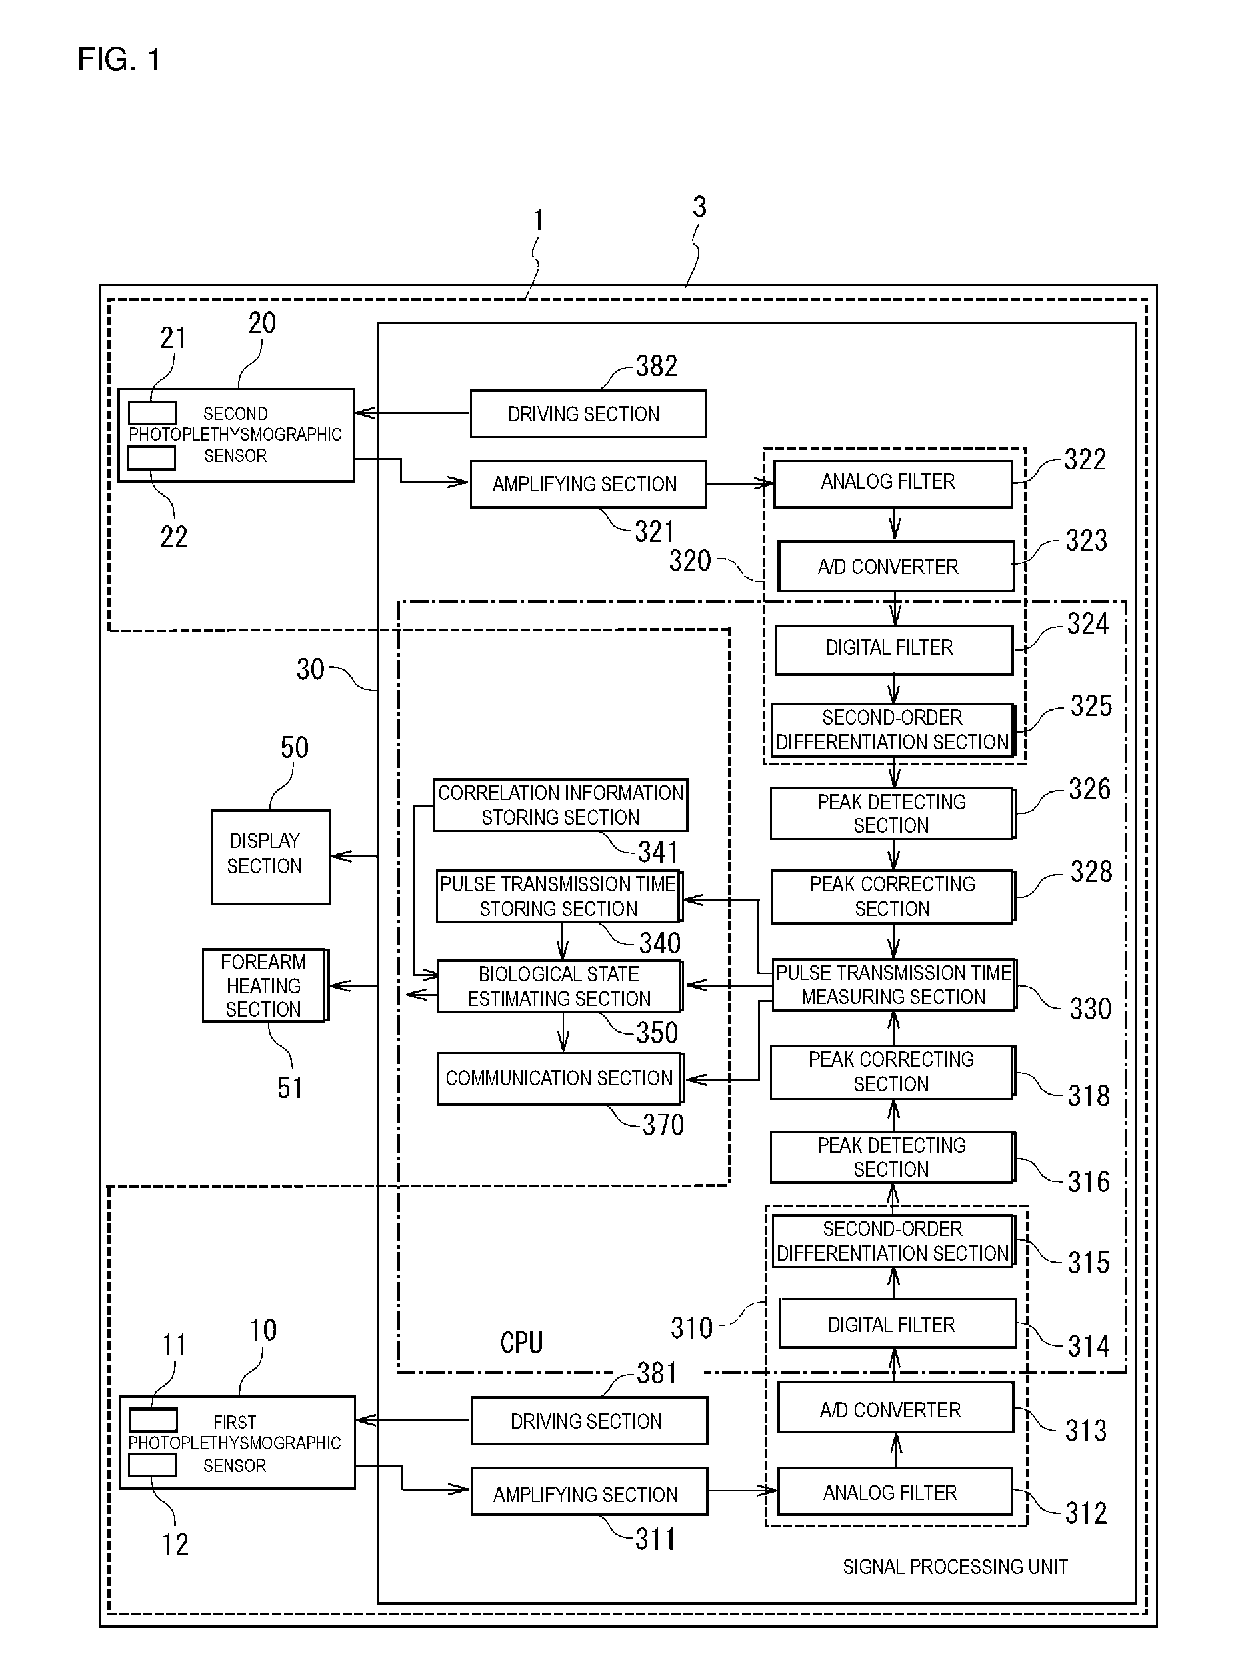 Pulse transmission time measuring apparatus and biological state estimating apparatus